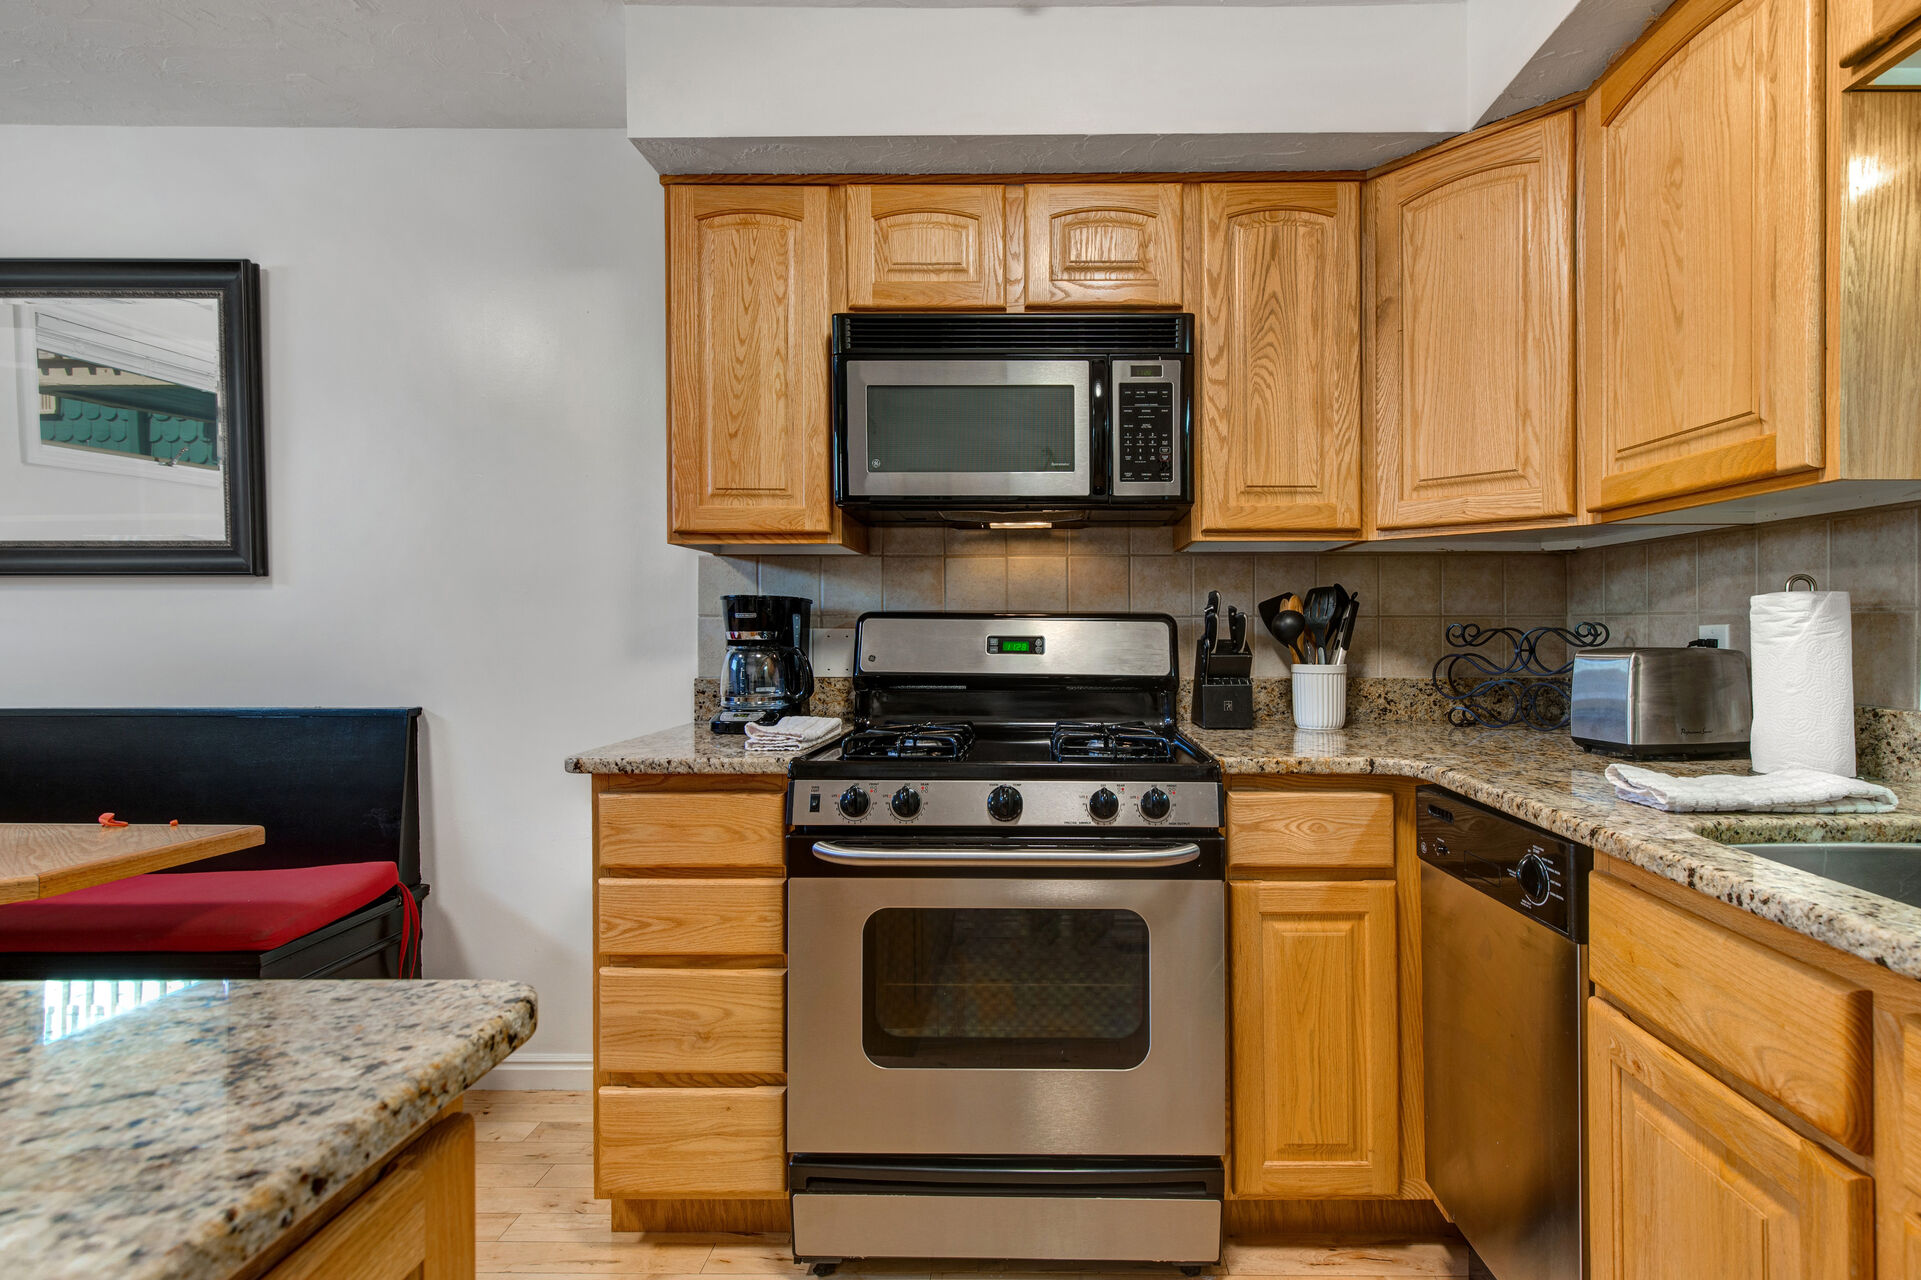 Fully Equipped Kitchen with Stainless Steel Appliances, Granite Countertops and Bar Seating for 2